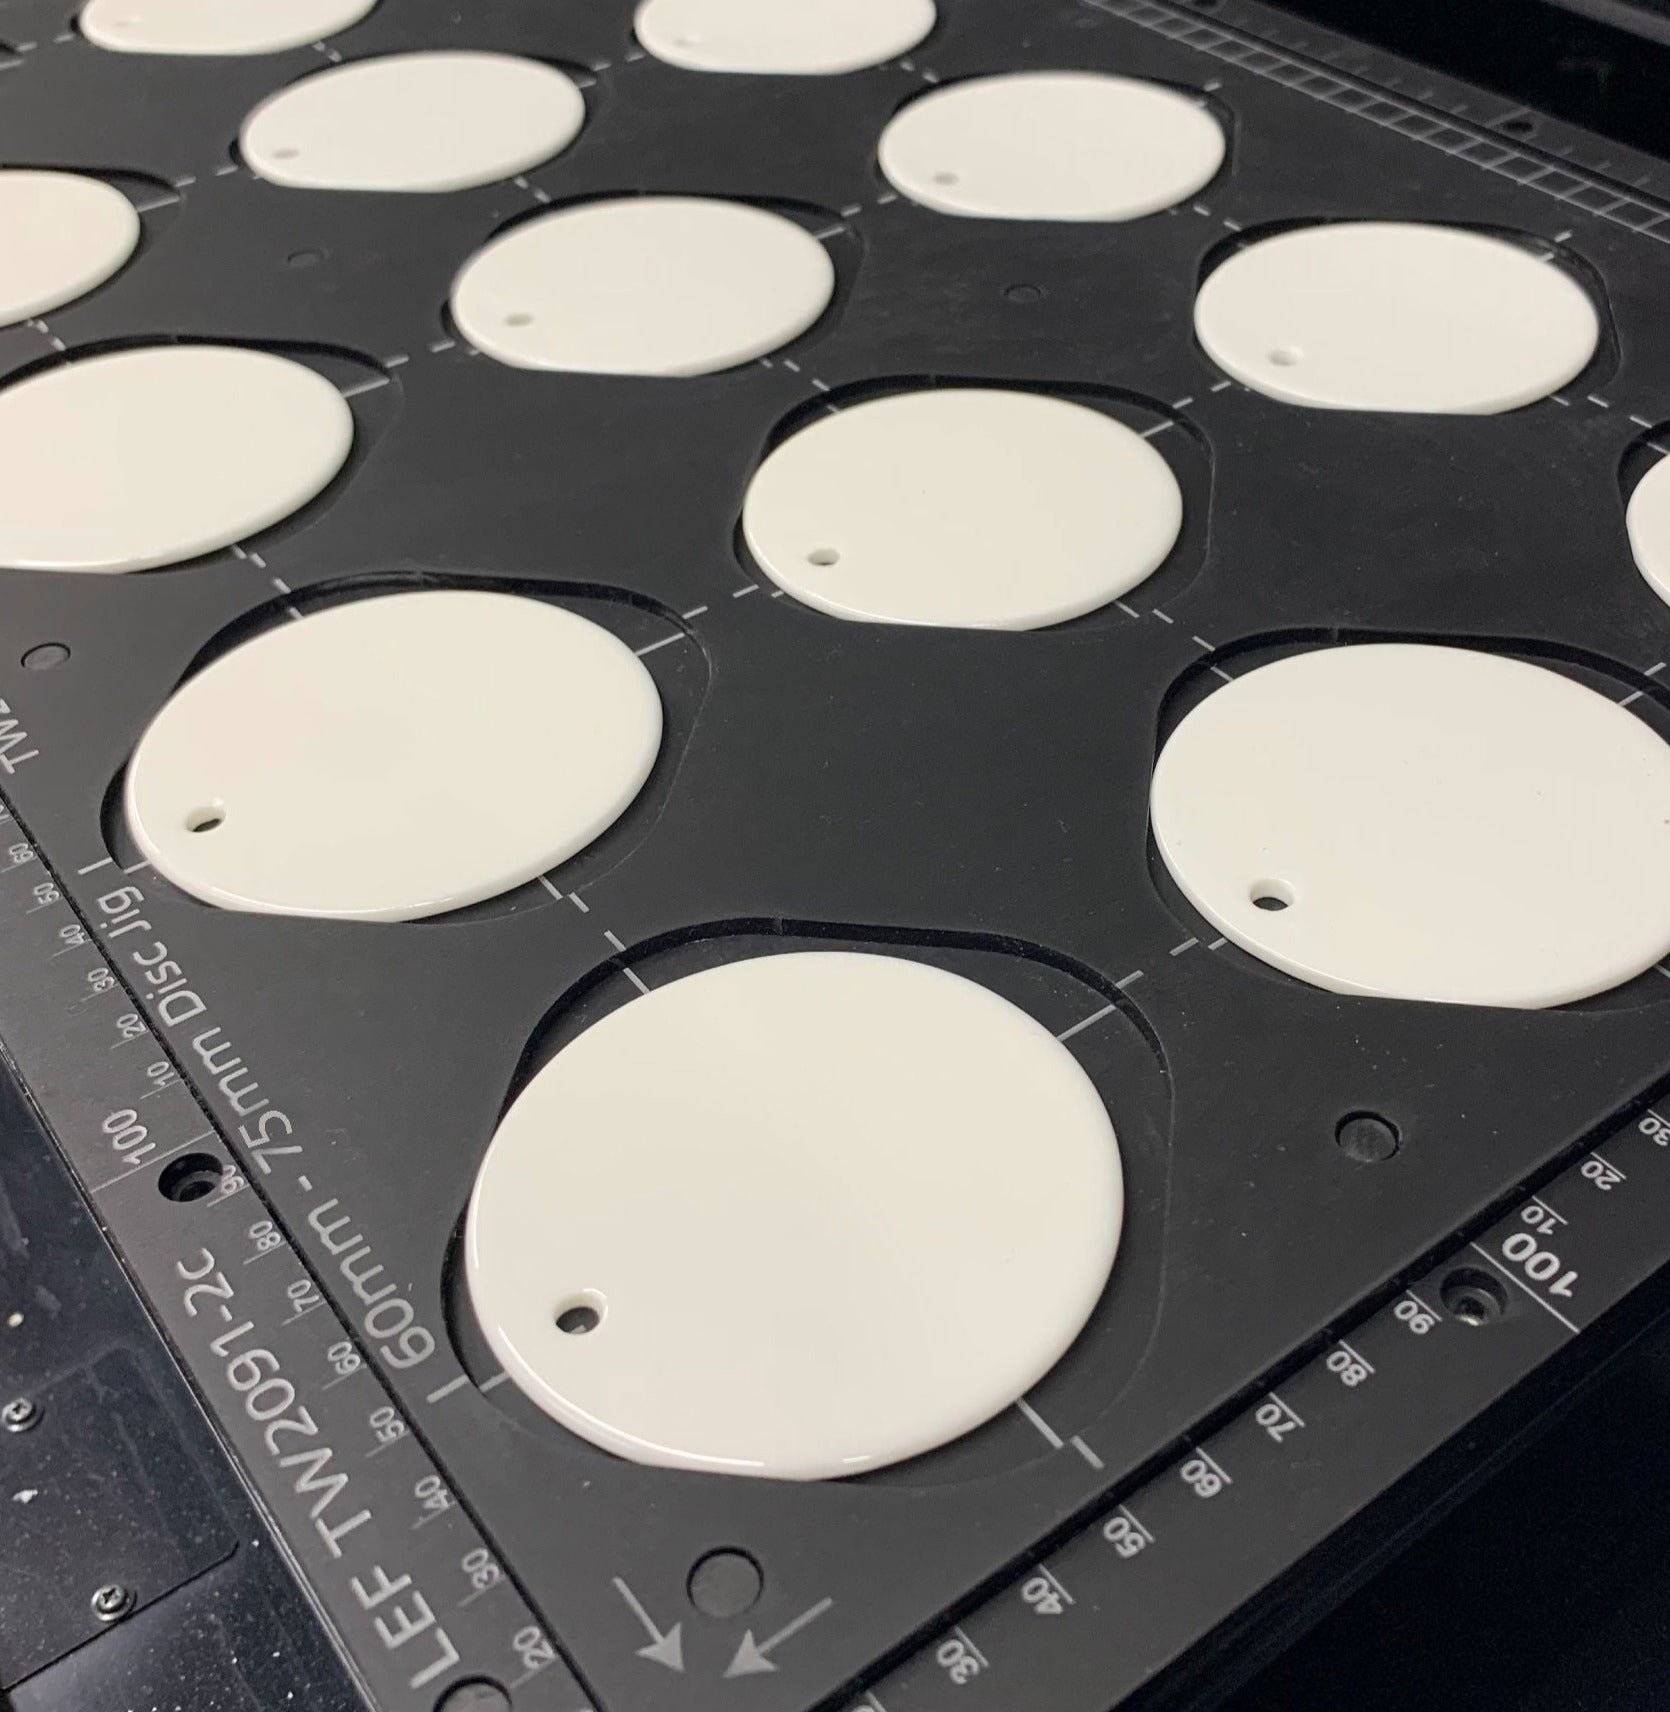 A4 Ceramic Christmas Bauble Printing Jig (60mm - 77mm Circular Discs) for A4 Flatbed Printers